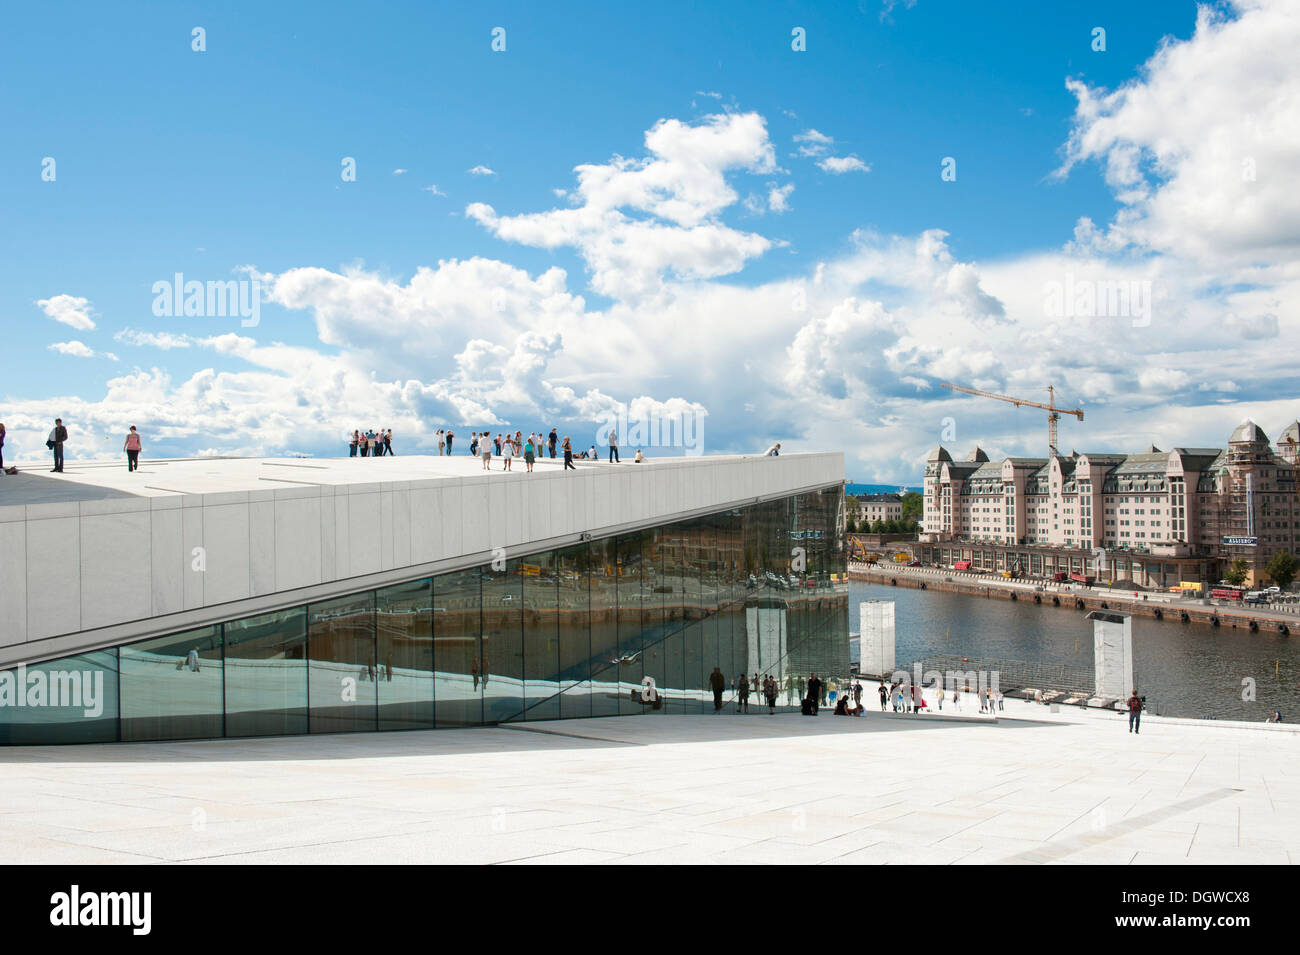 Modern architecture, inclined plane, people walking on the roof, New Opera House, Operaen, Oslo, Norway, Scandinavia Stock Photo